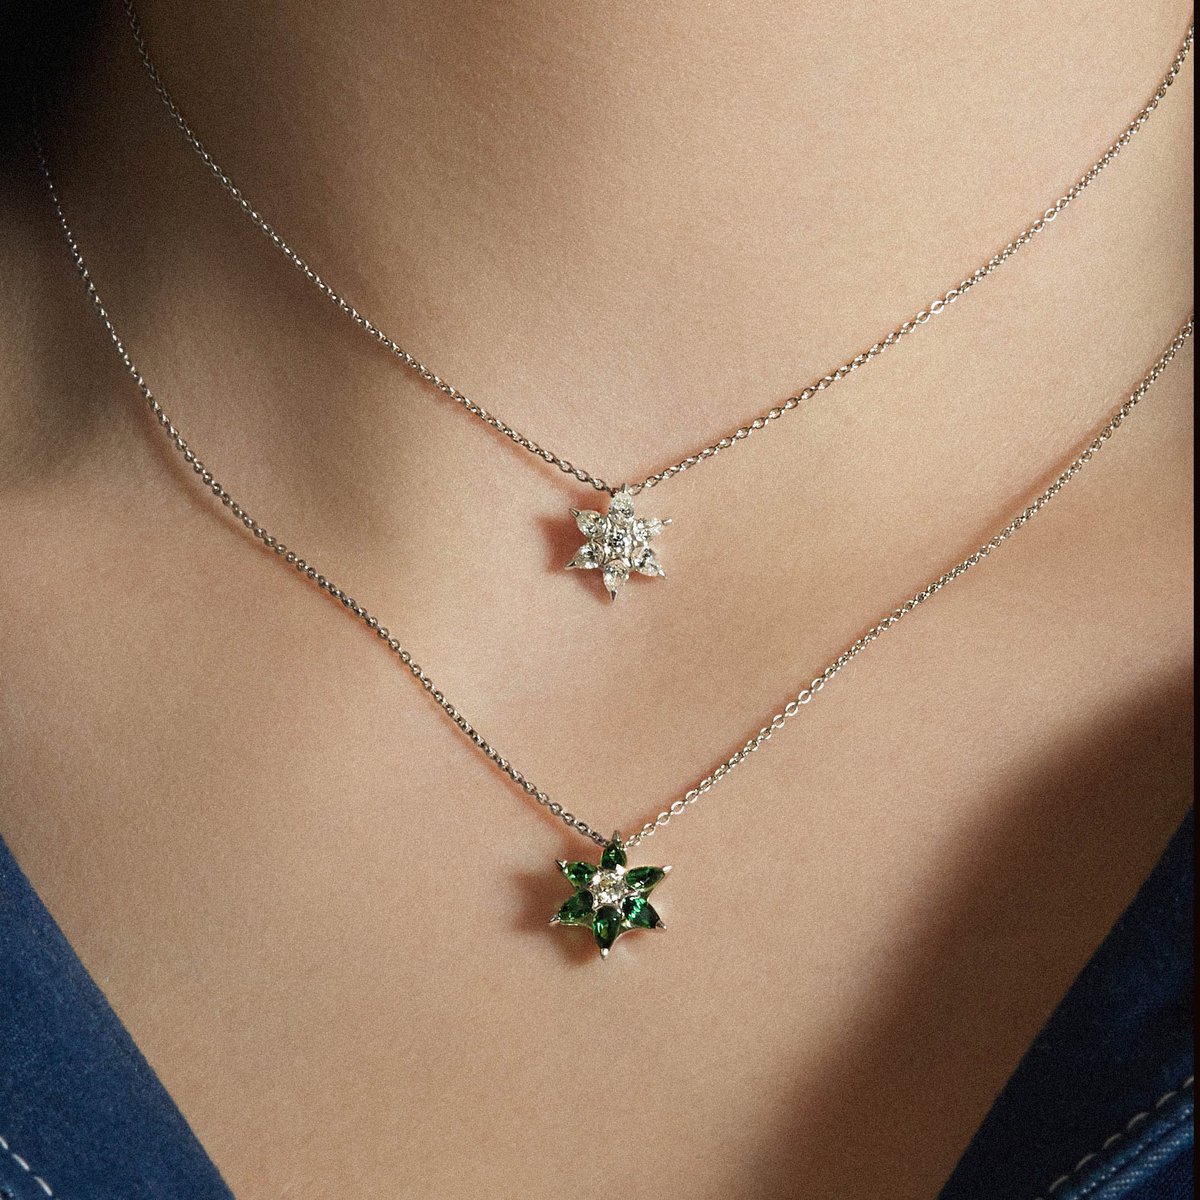 Beautiful jewellery inspired by nature. These pretty necklaces are full of spring sparkle ✨

#inspiredbynature #emeralds #diamonds #birthstones